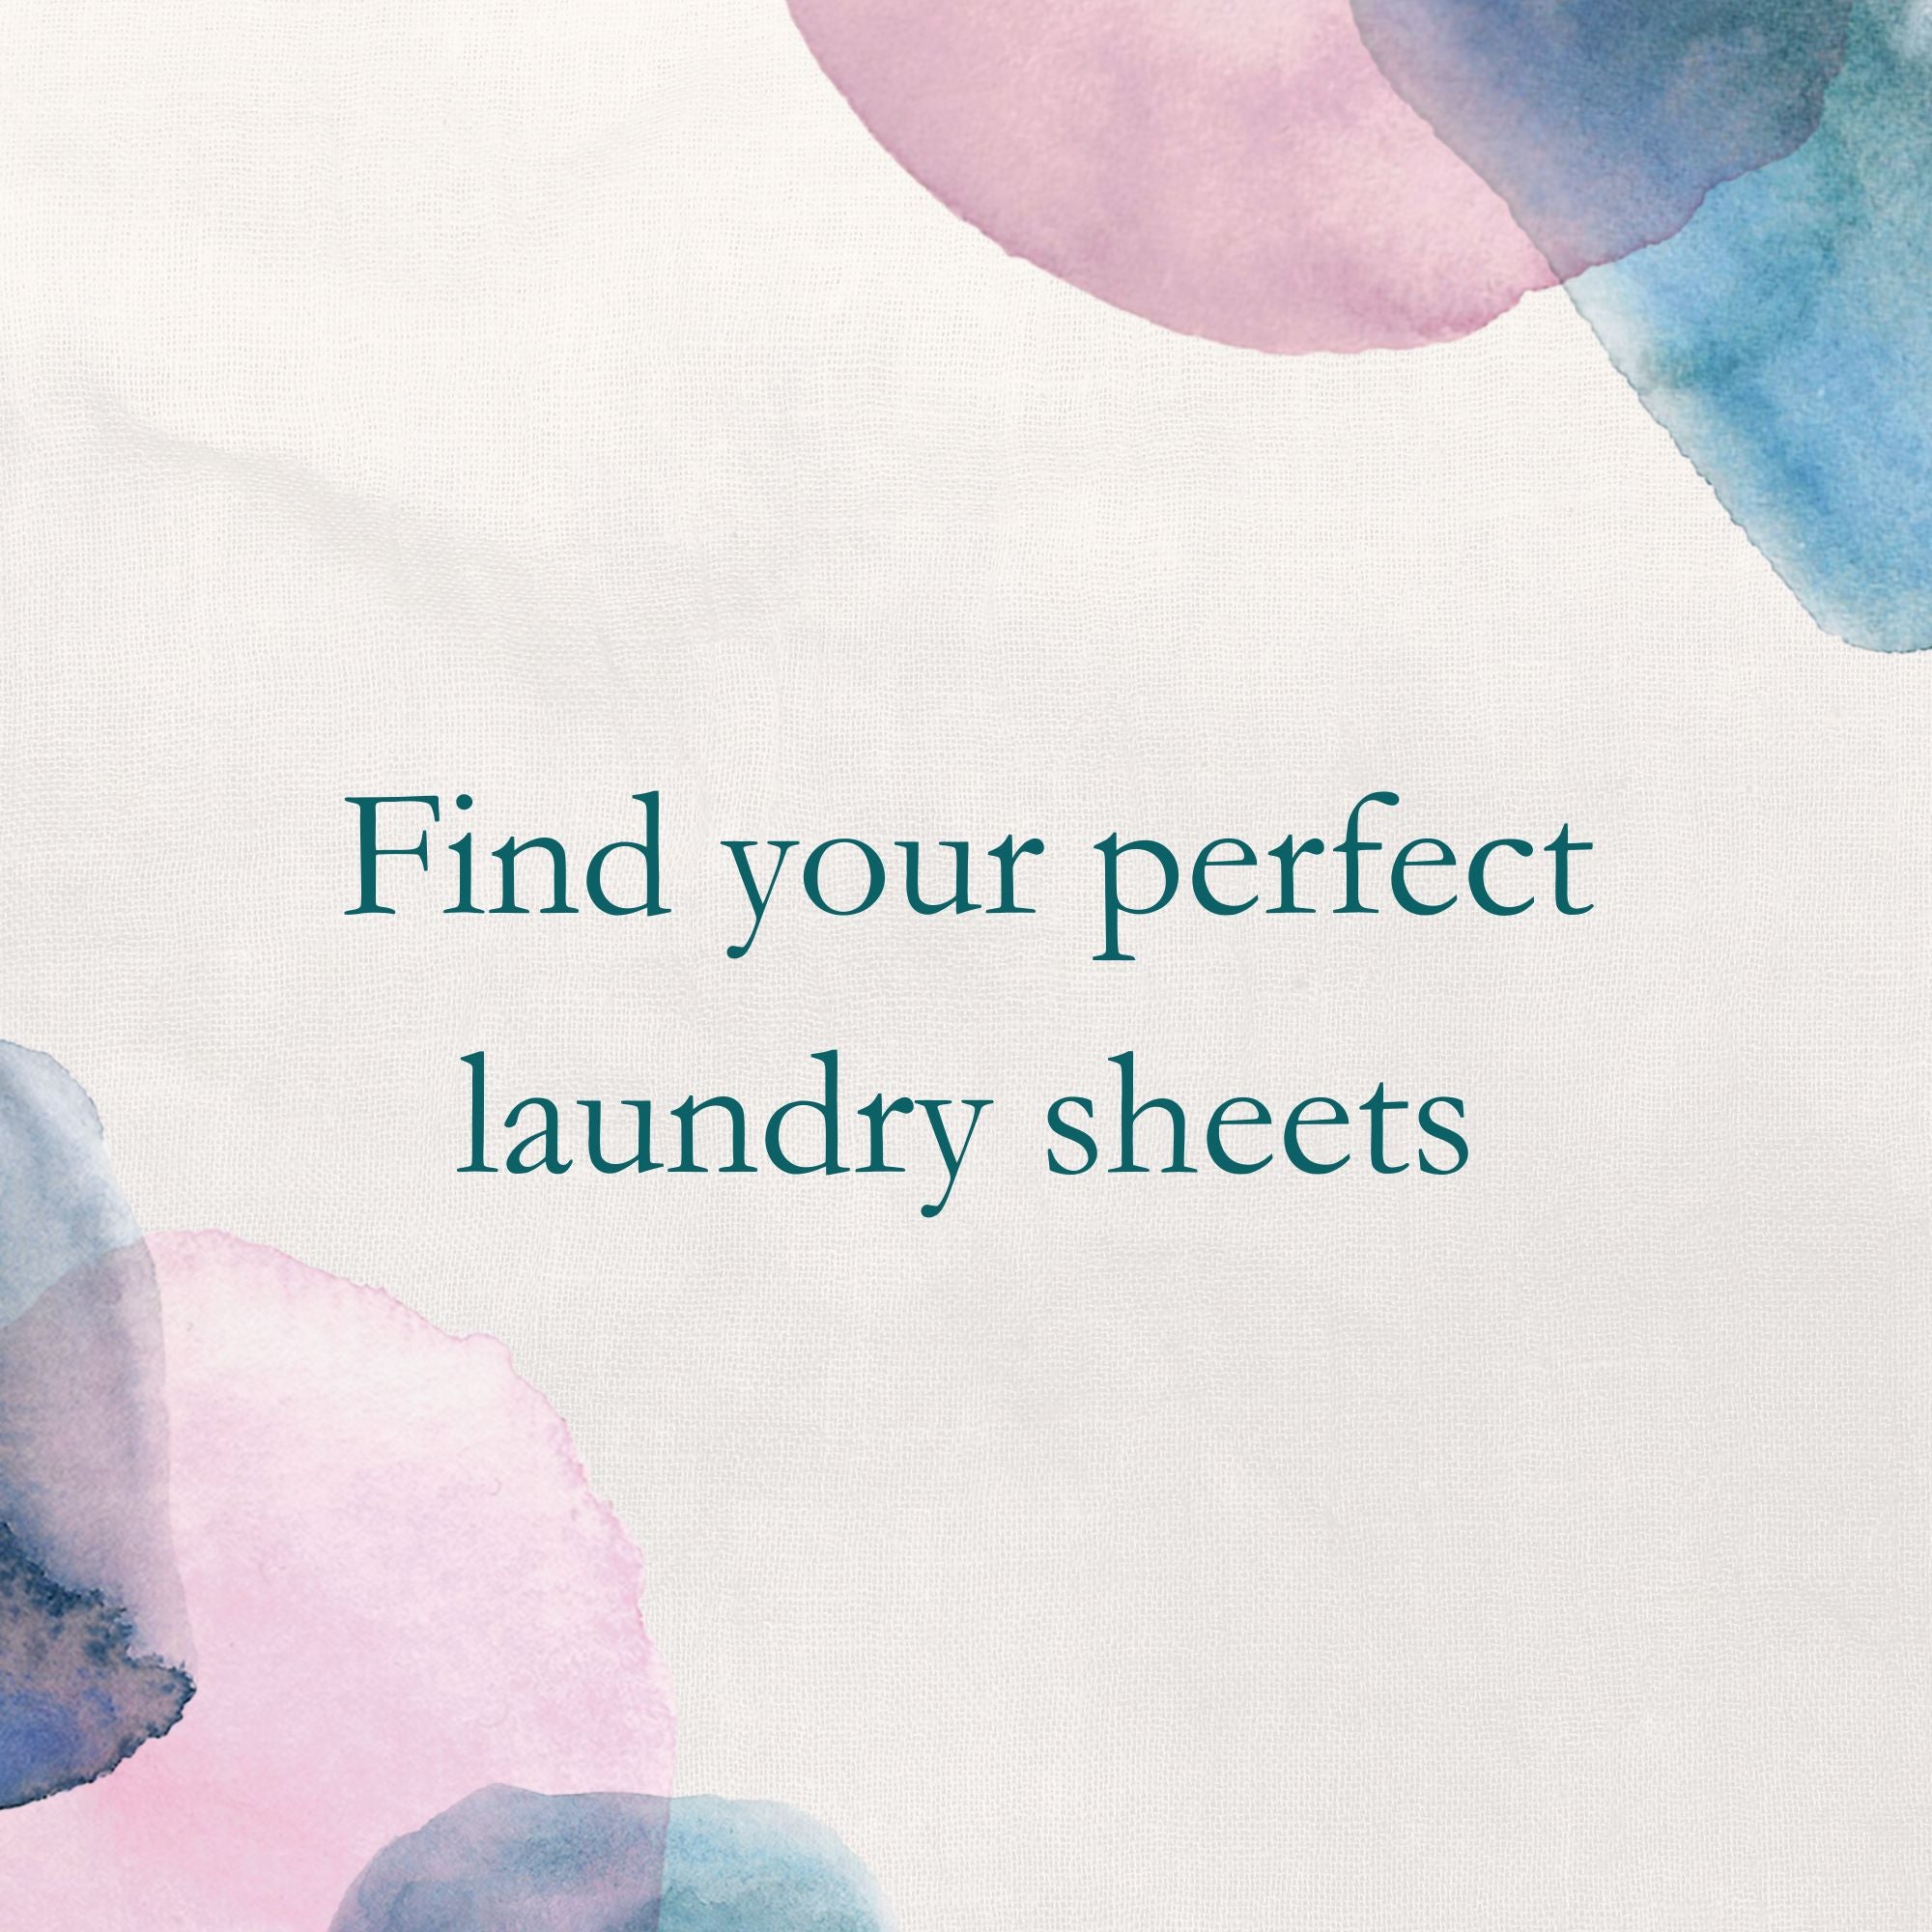 Find your perfect laundry detergent sheets